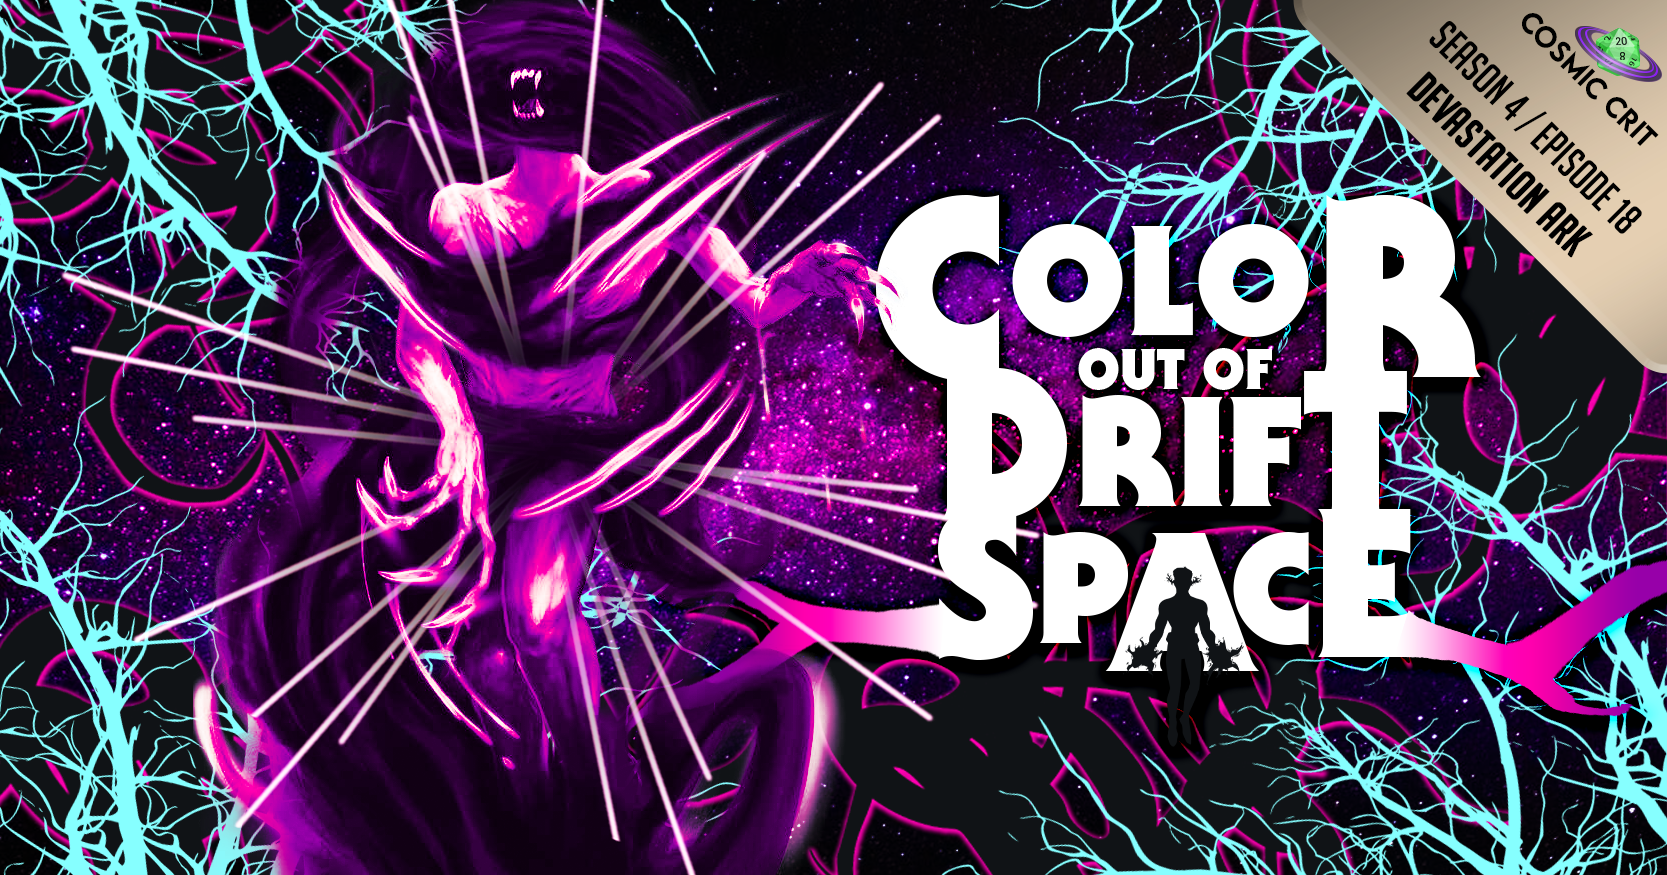 S4 | 217: Color Out of Drift Space